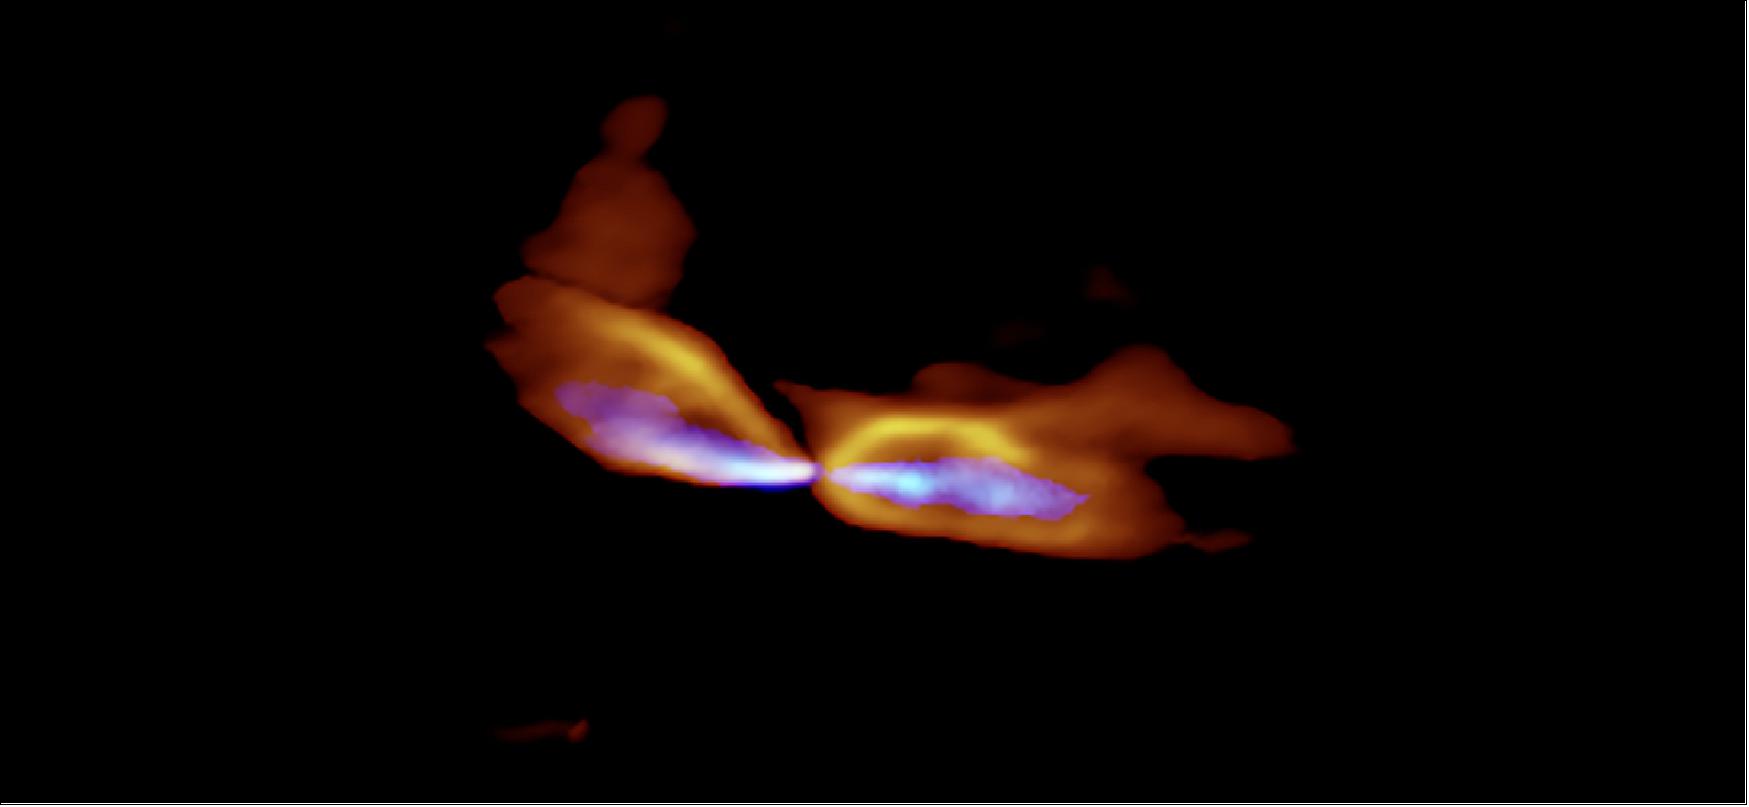 Figure 100: ALMA image of the protostar MMS5/OMC-3. The protostar is located at the center and the gas streams are ejected to the east and west (left and right). The slow outflow is shown in orange and the fast jet is shown in blue. It is obvious that the axes of the outflow and jet are misaligned (image credit: ALMA (ESO/NAOJ/NRAO) Matsushita et al.)